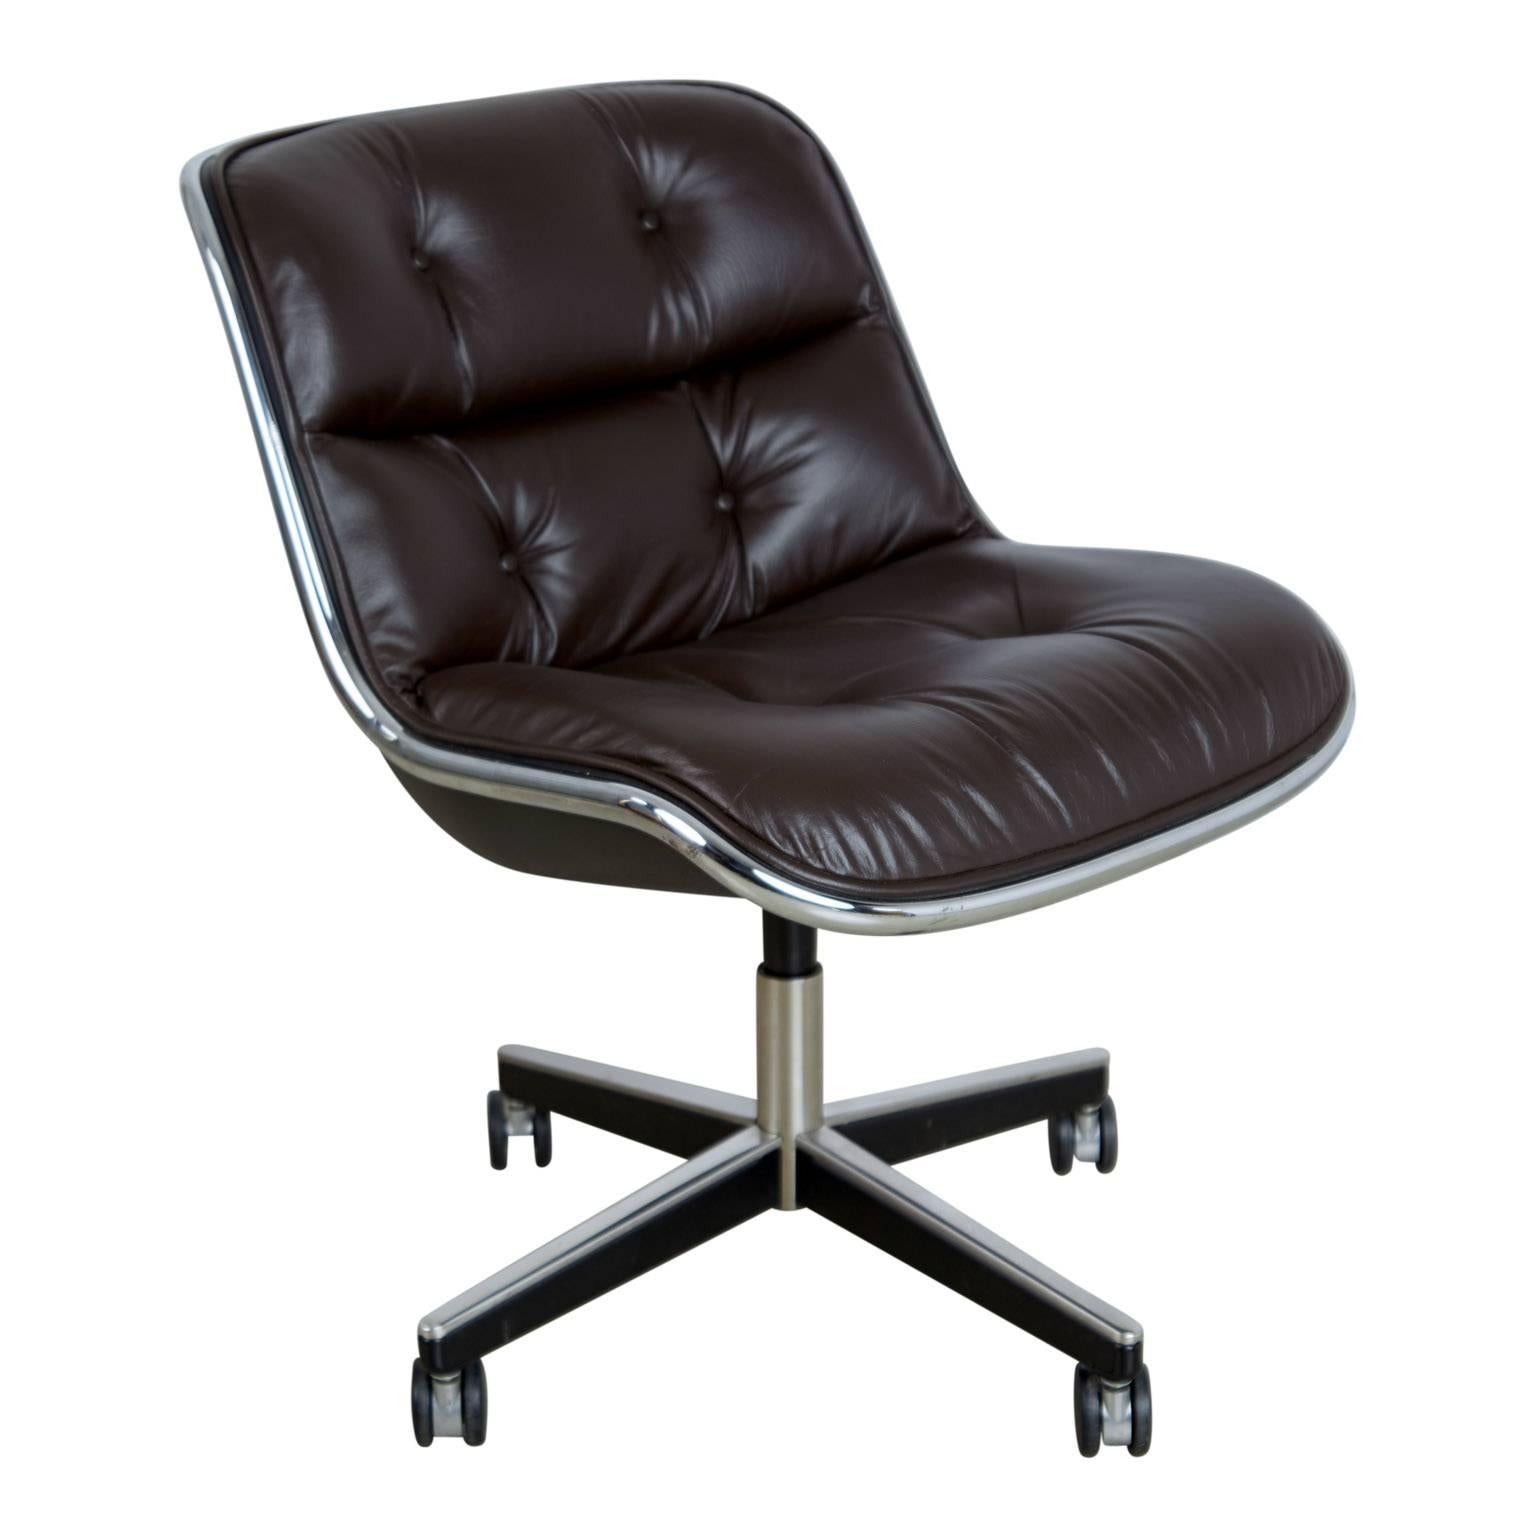 Knoll first introduced these executive office chairs in 1965 and since then they have become a recognized staple for professional interiors and home workspaces alike. These timeless chairs are still in production today and have met demand due to